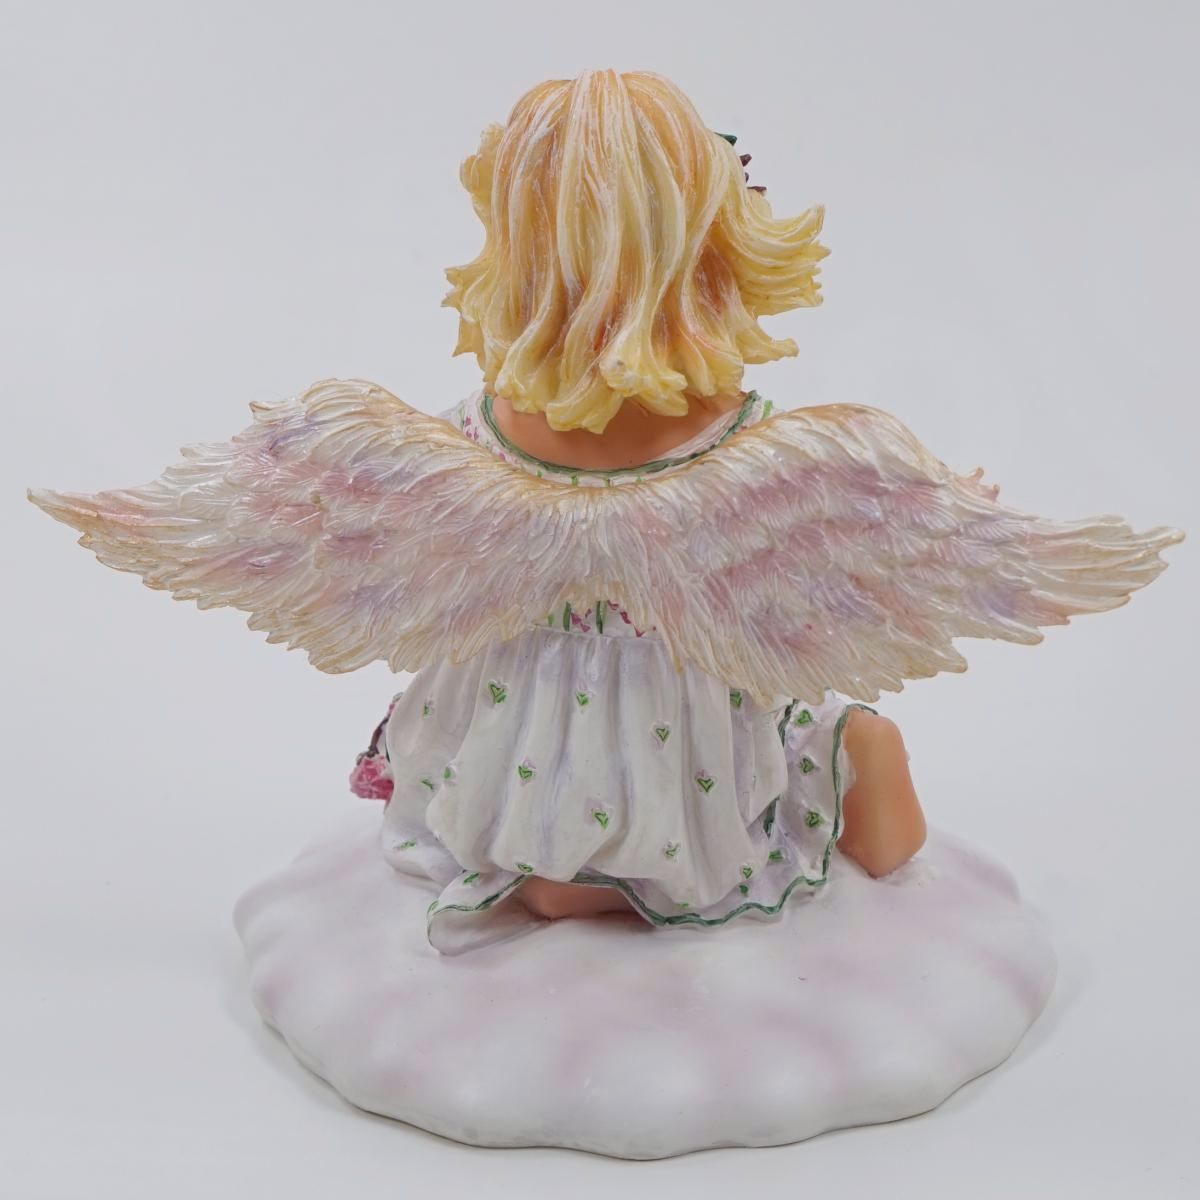 Crisalis Collection ★ Angel of Tenderness (1-684) Standard